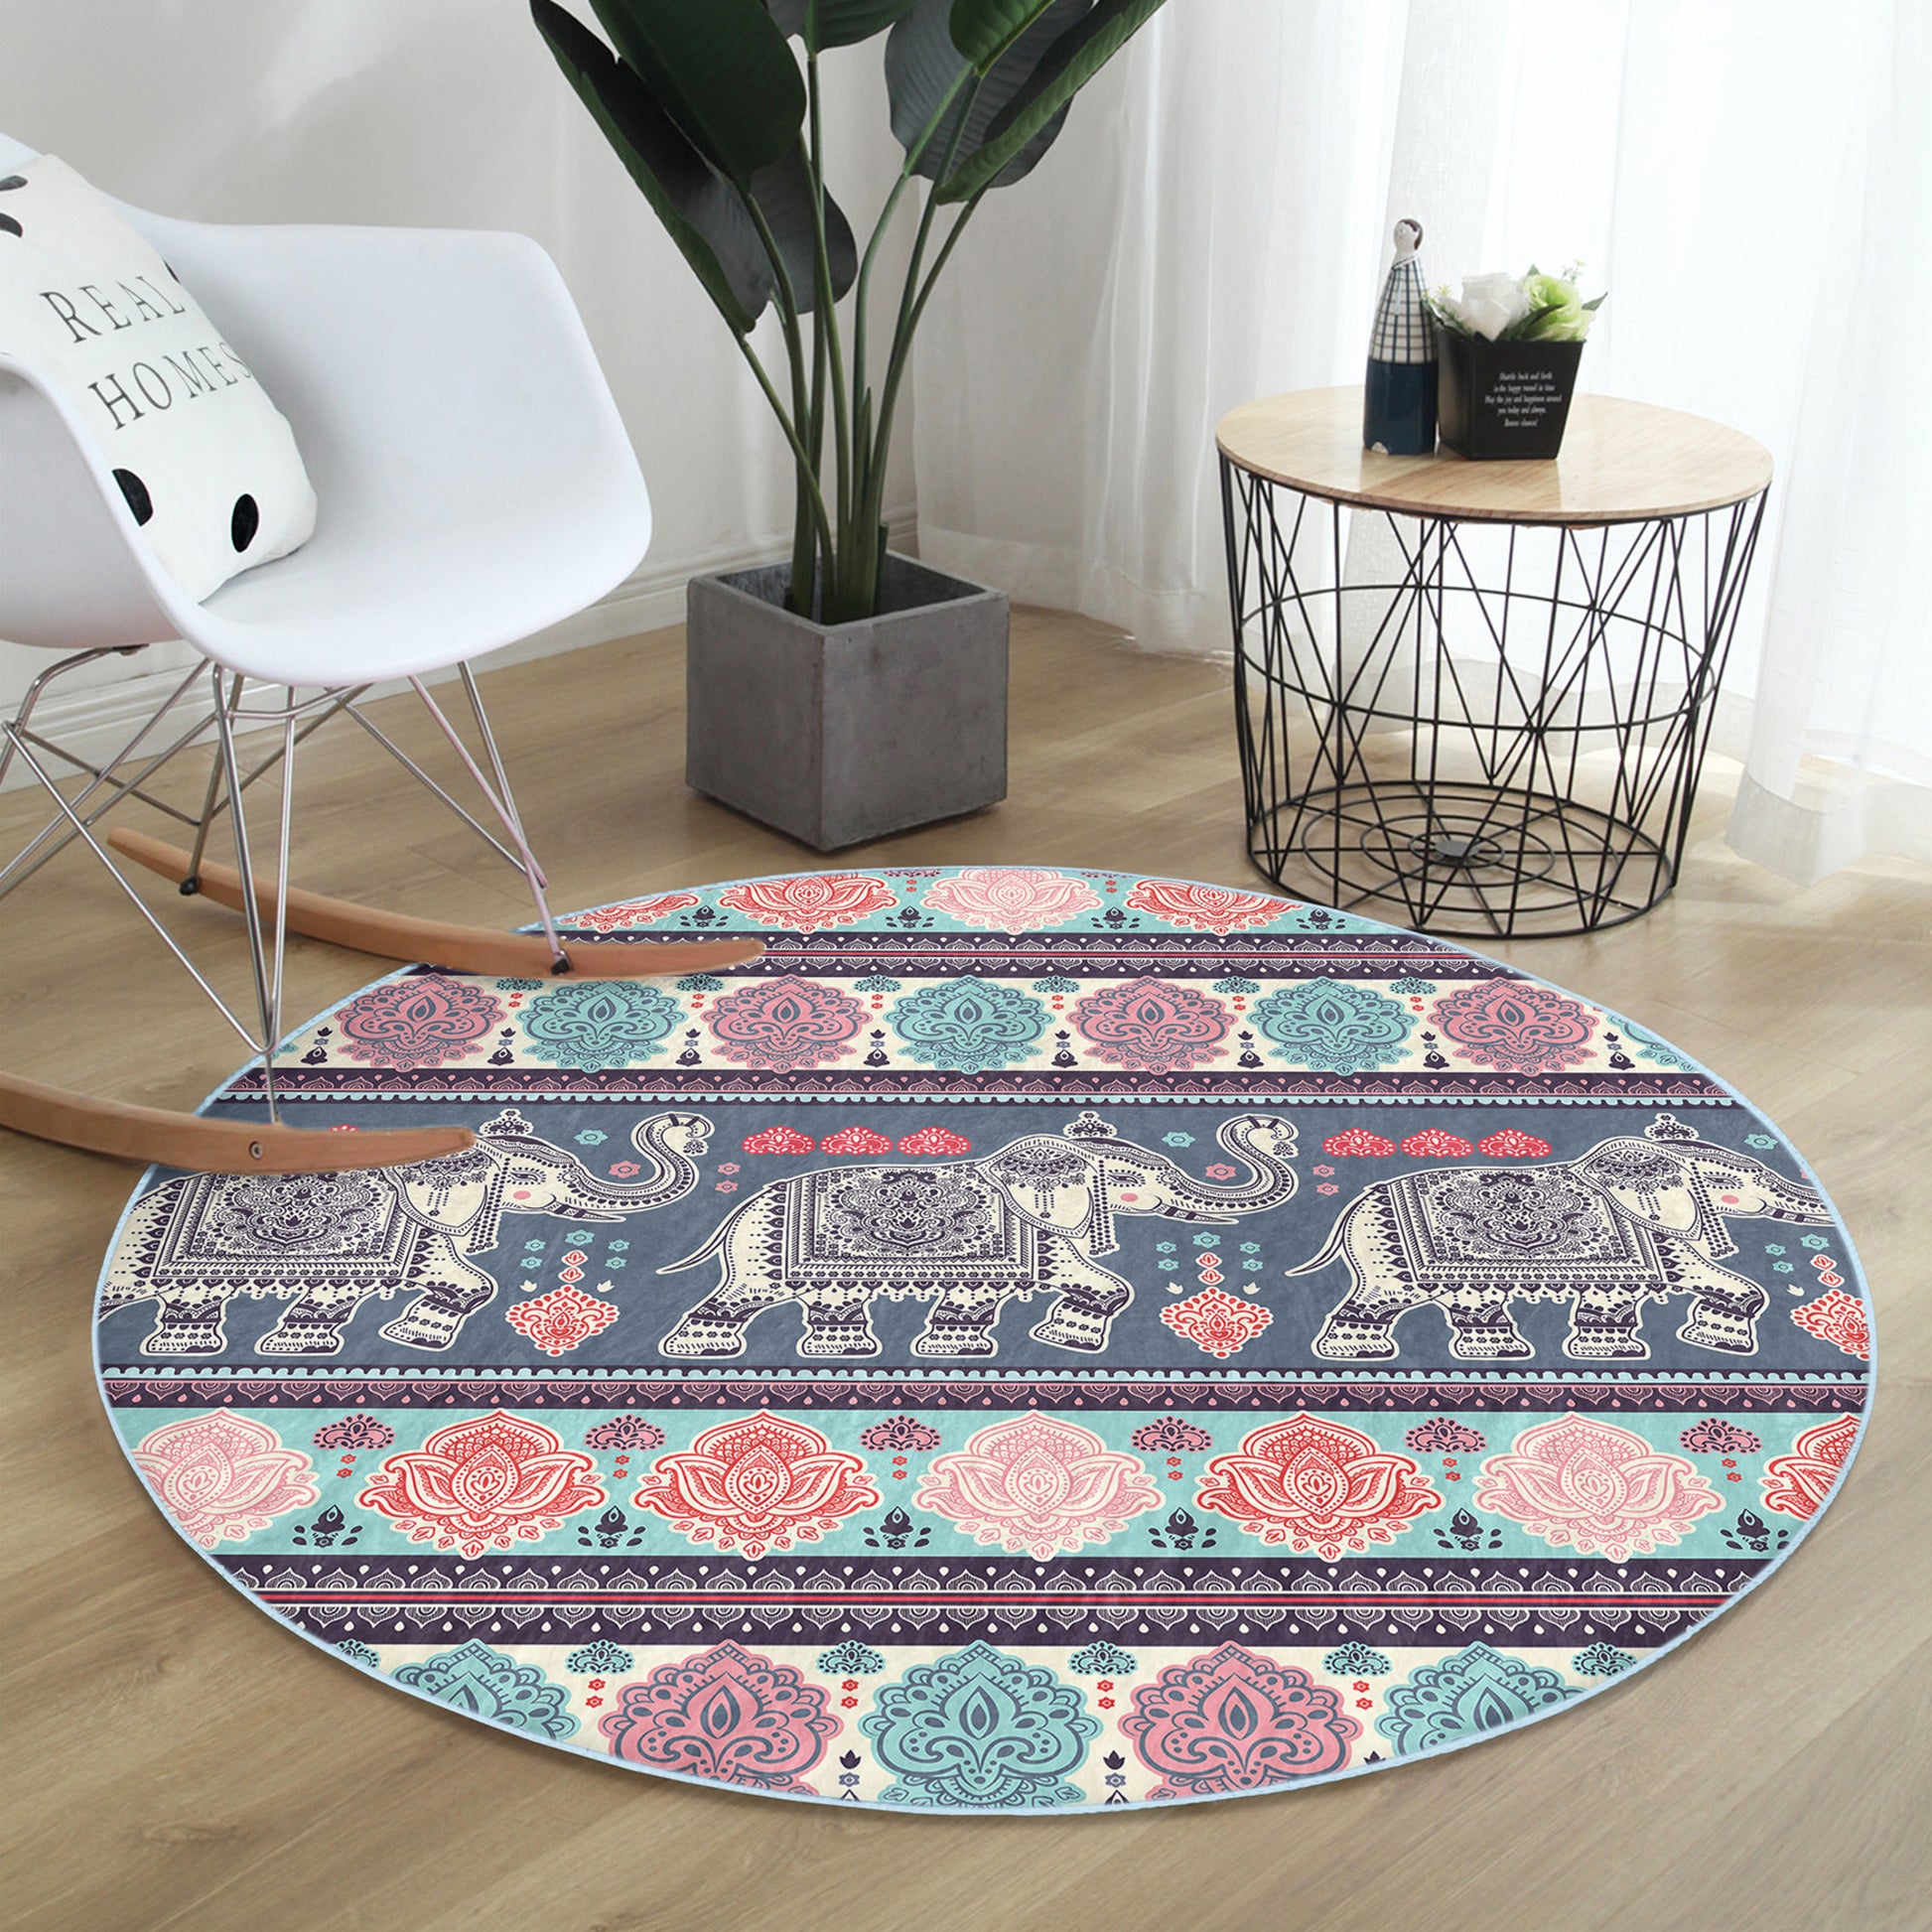 Boho Vibes in Your Living Room with Elephant Rug